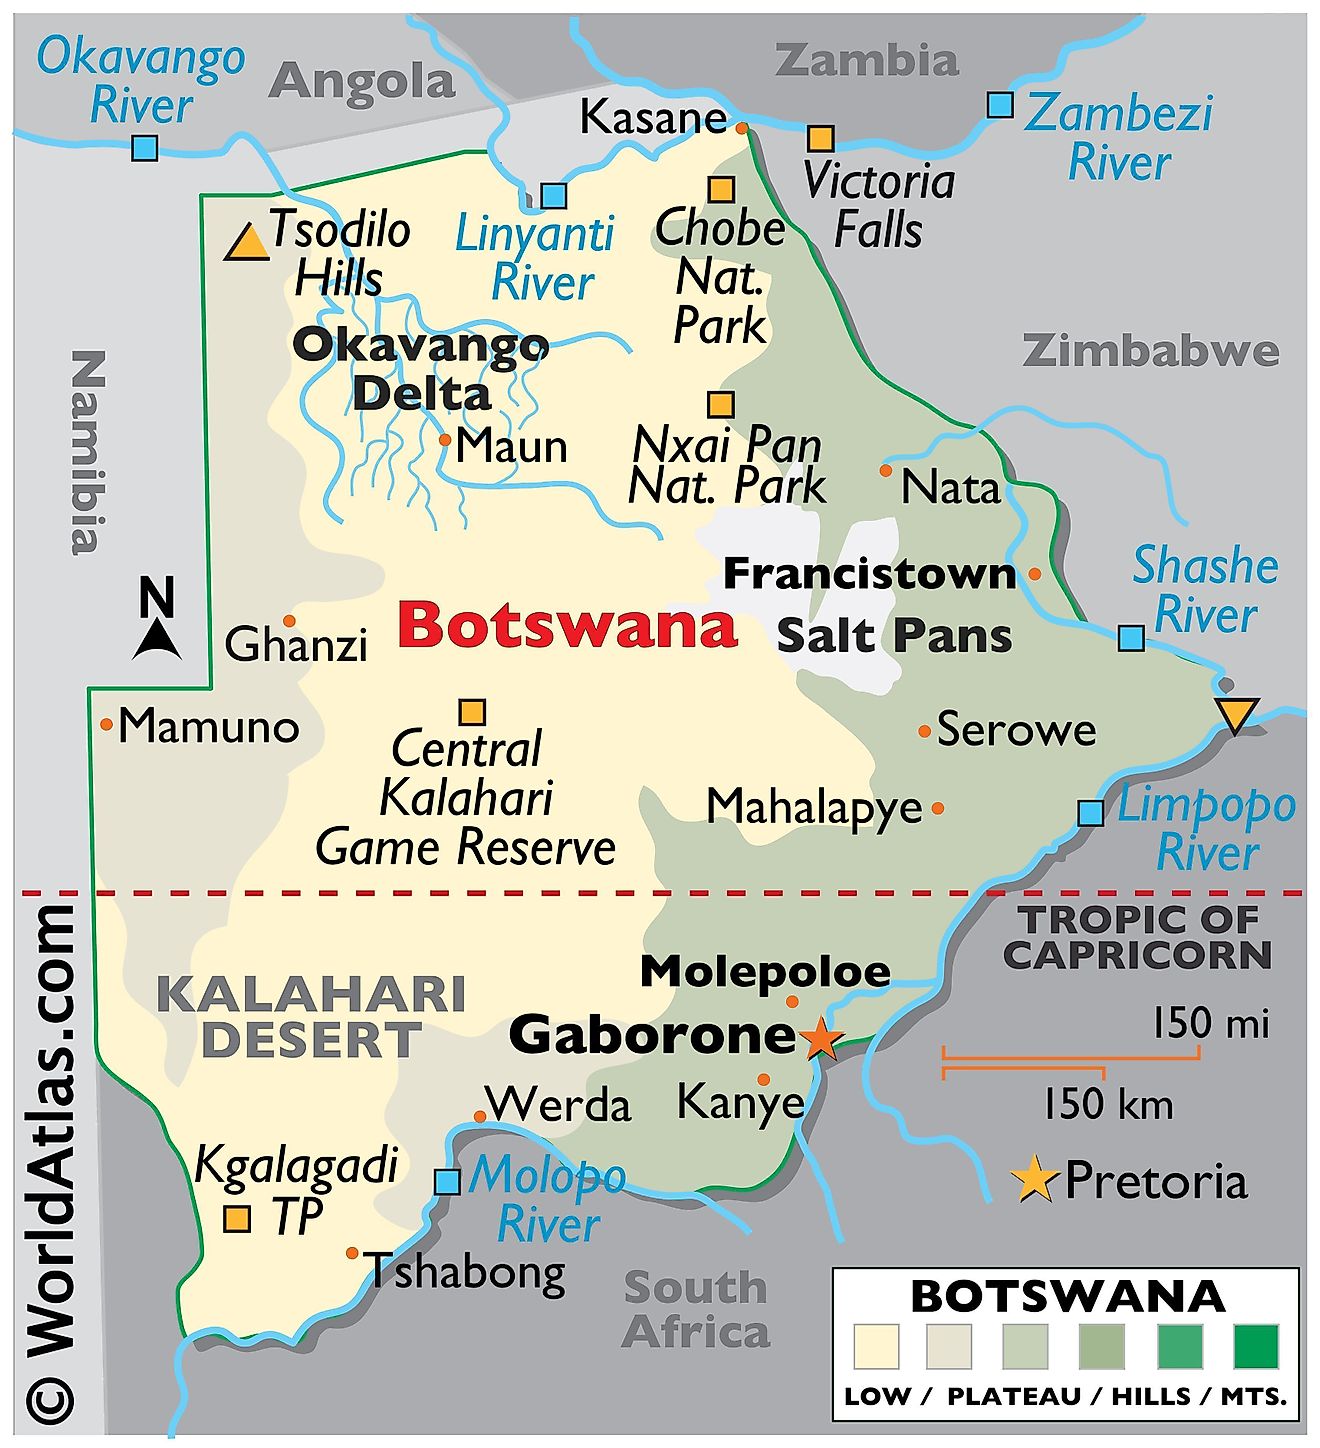 Physical Map of Botswana with state boundaries. The map also displays the physical features of Botswana including relief, major rivers and lakes, the Okavango Delta, extreme points, desert area, and major cities.